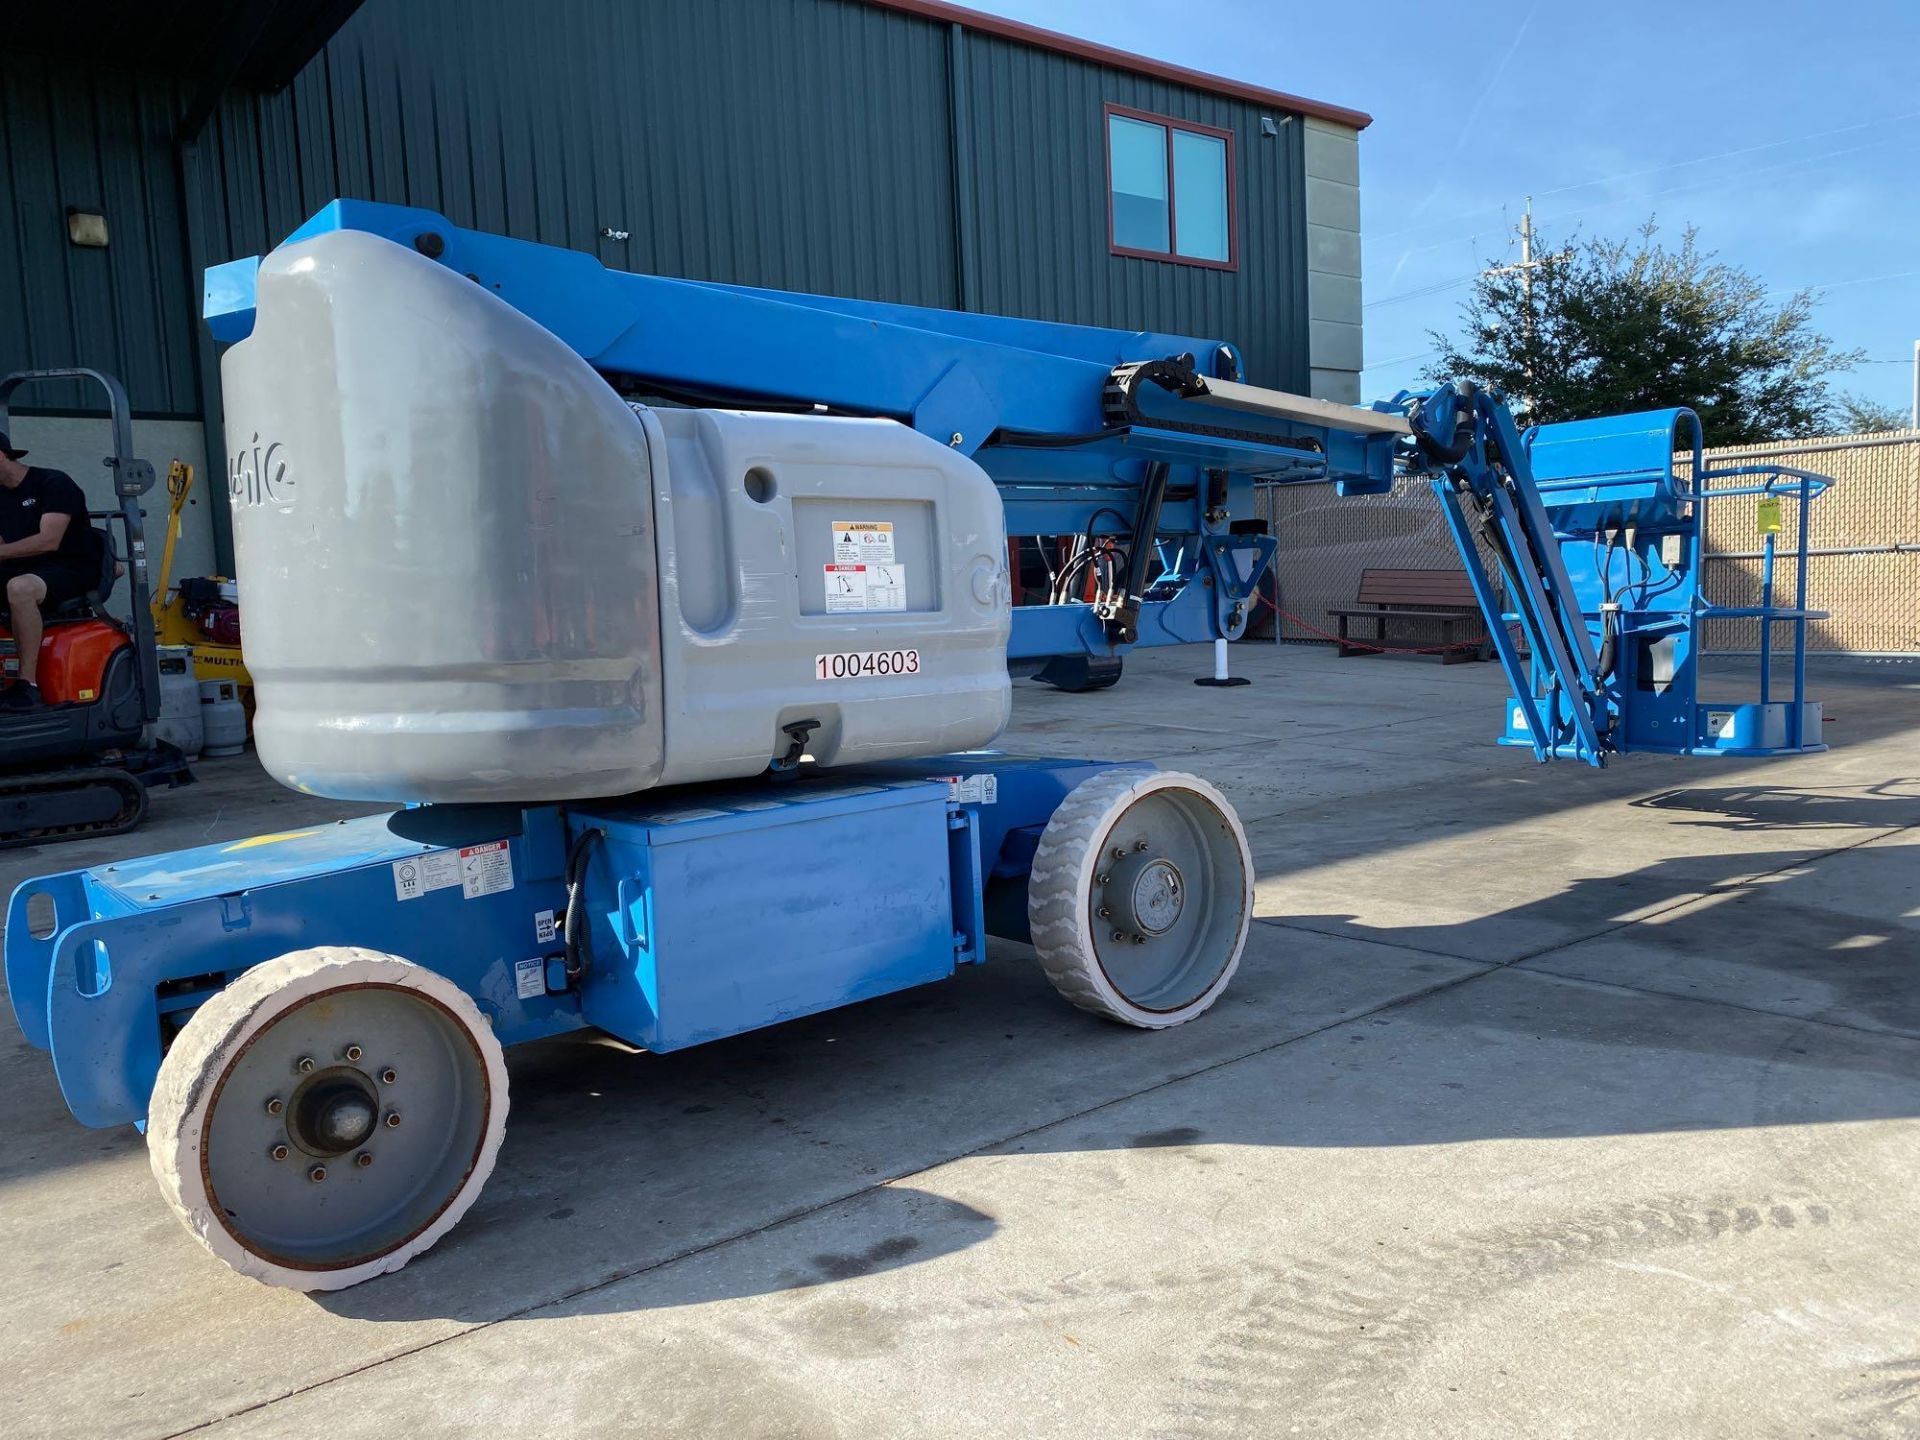 GENIE ELECTRIC BOOM LIFT MODEL Z-40/23N RJ, 40' PLATFORM HEIGHT, RUNS AND OPERATES - Image 5 of 8